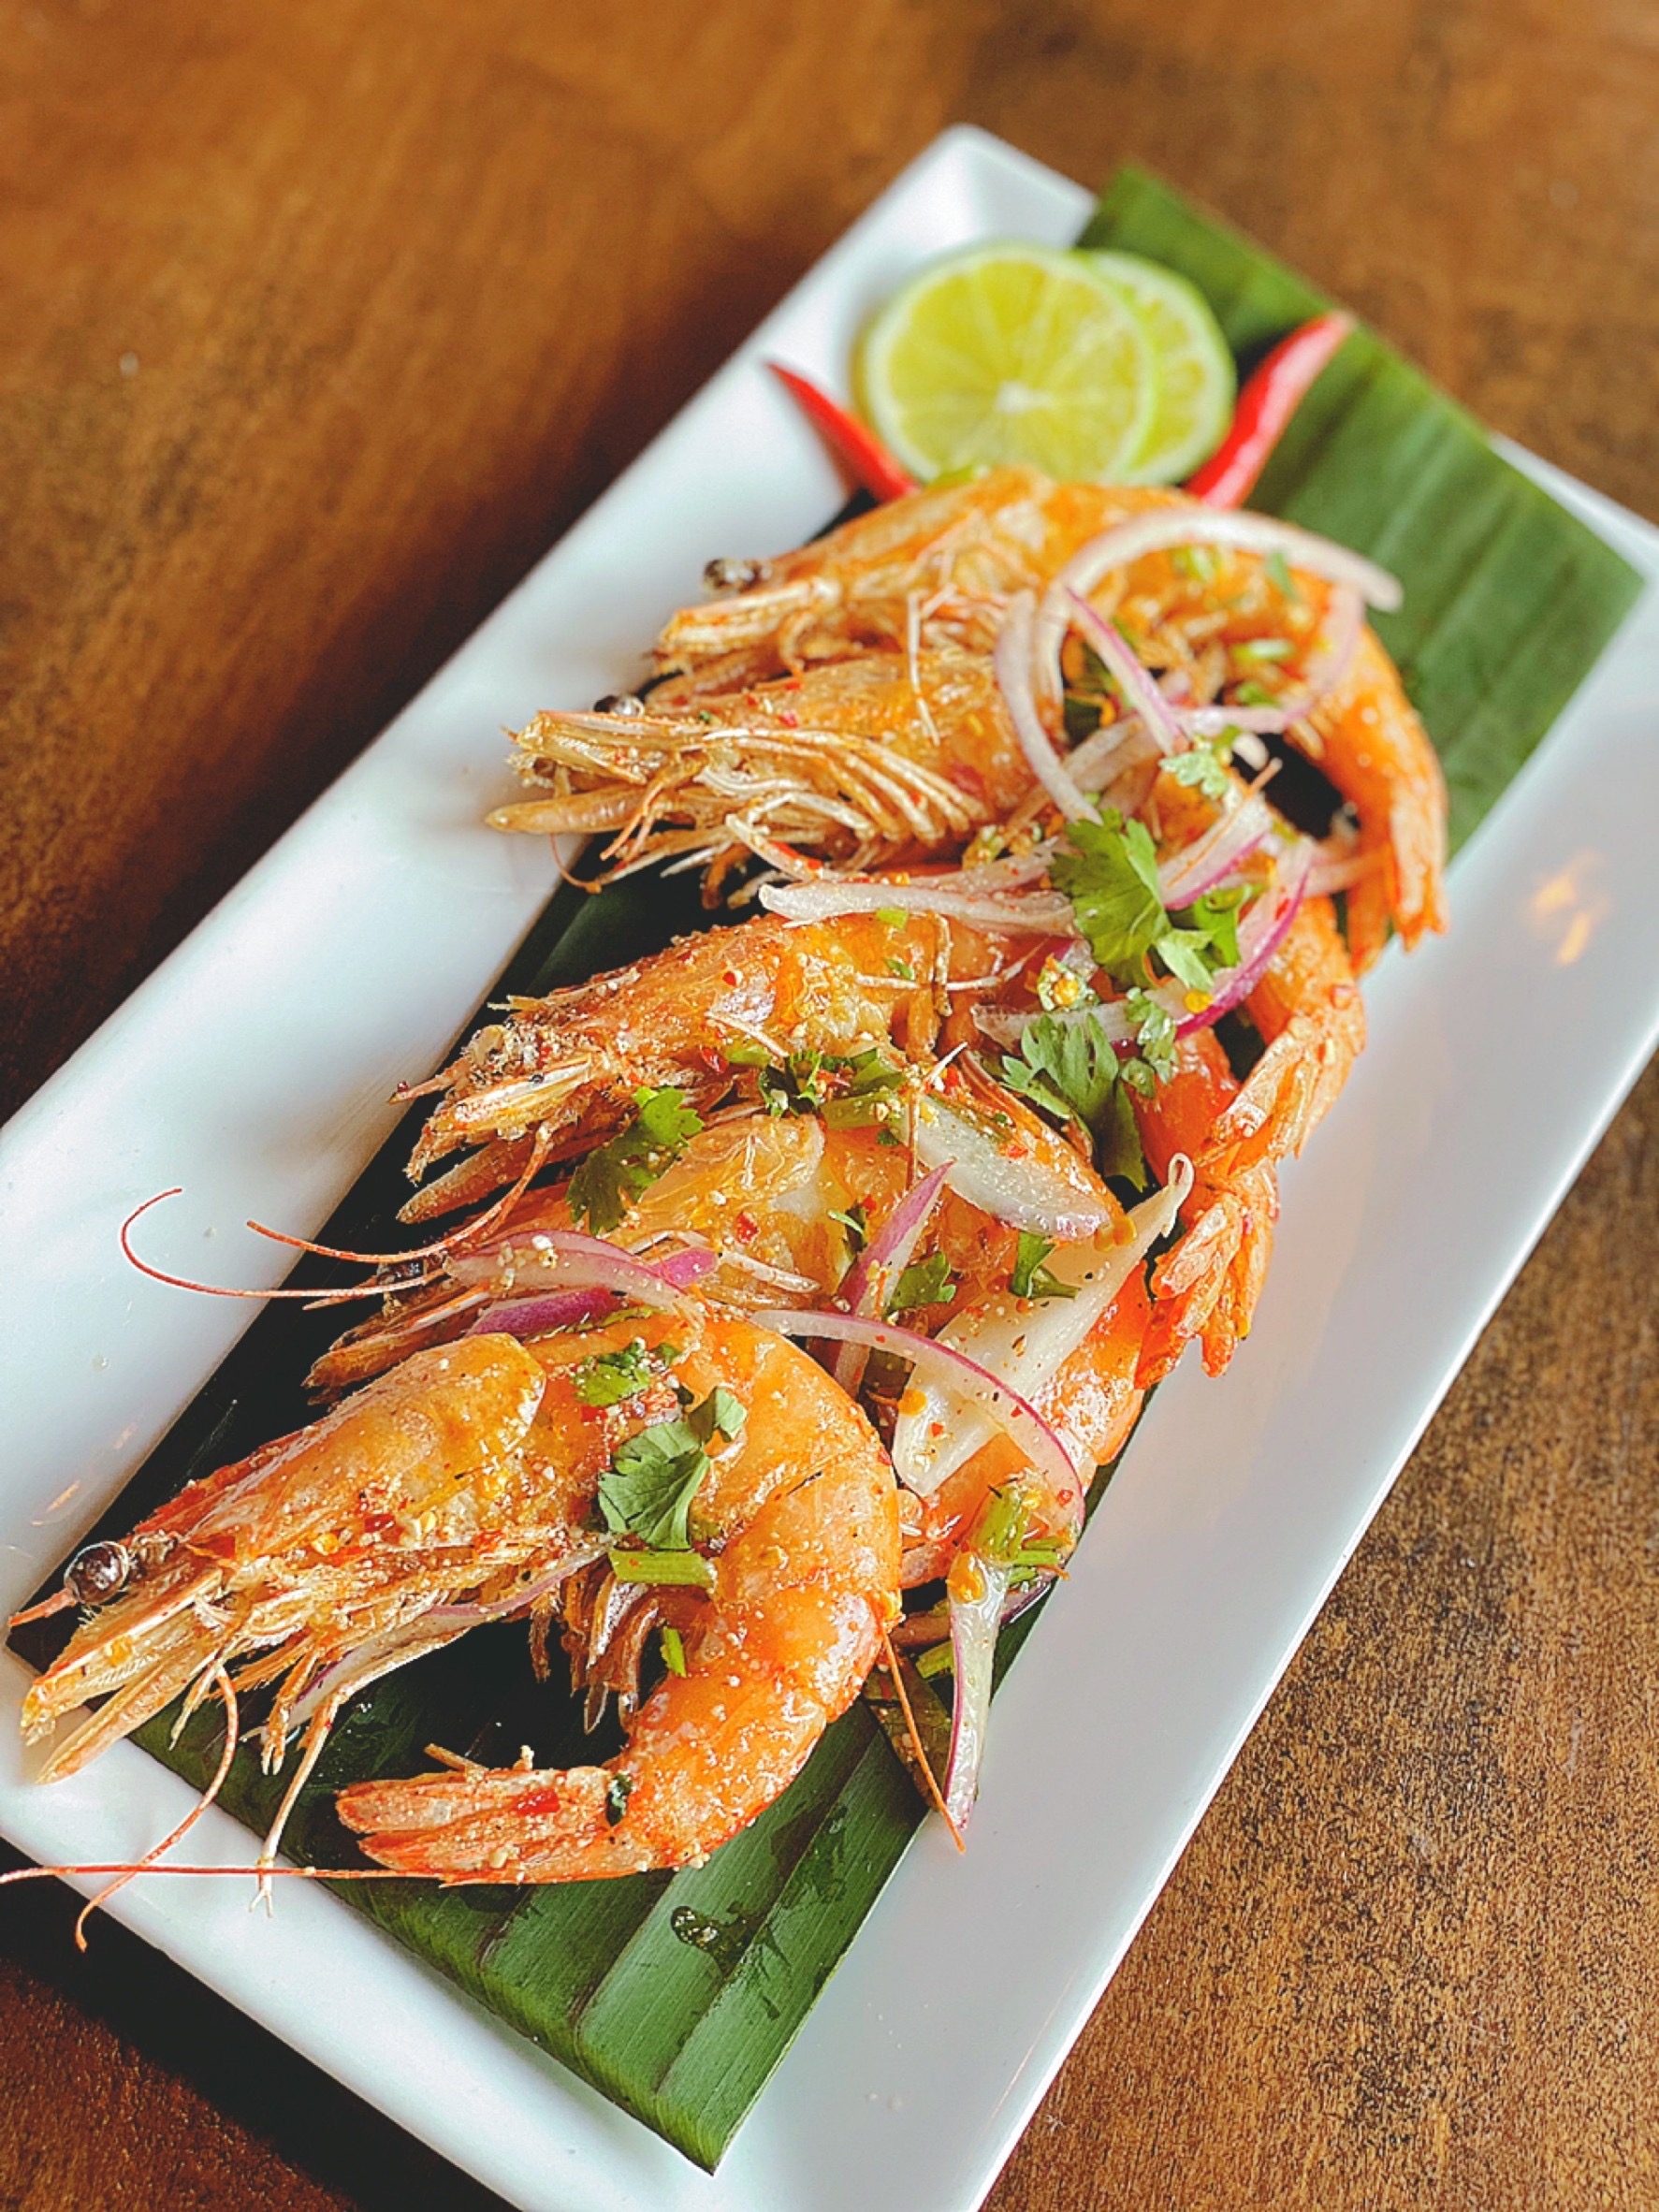 Large prawns resting on a bamboo leaf and white plate.